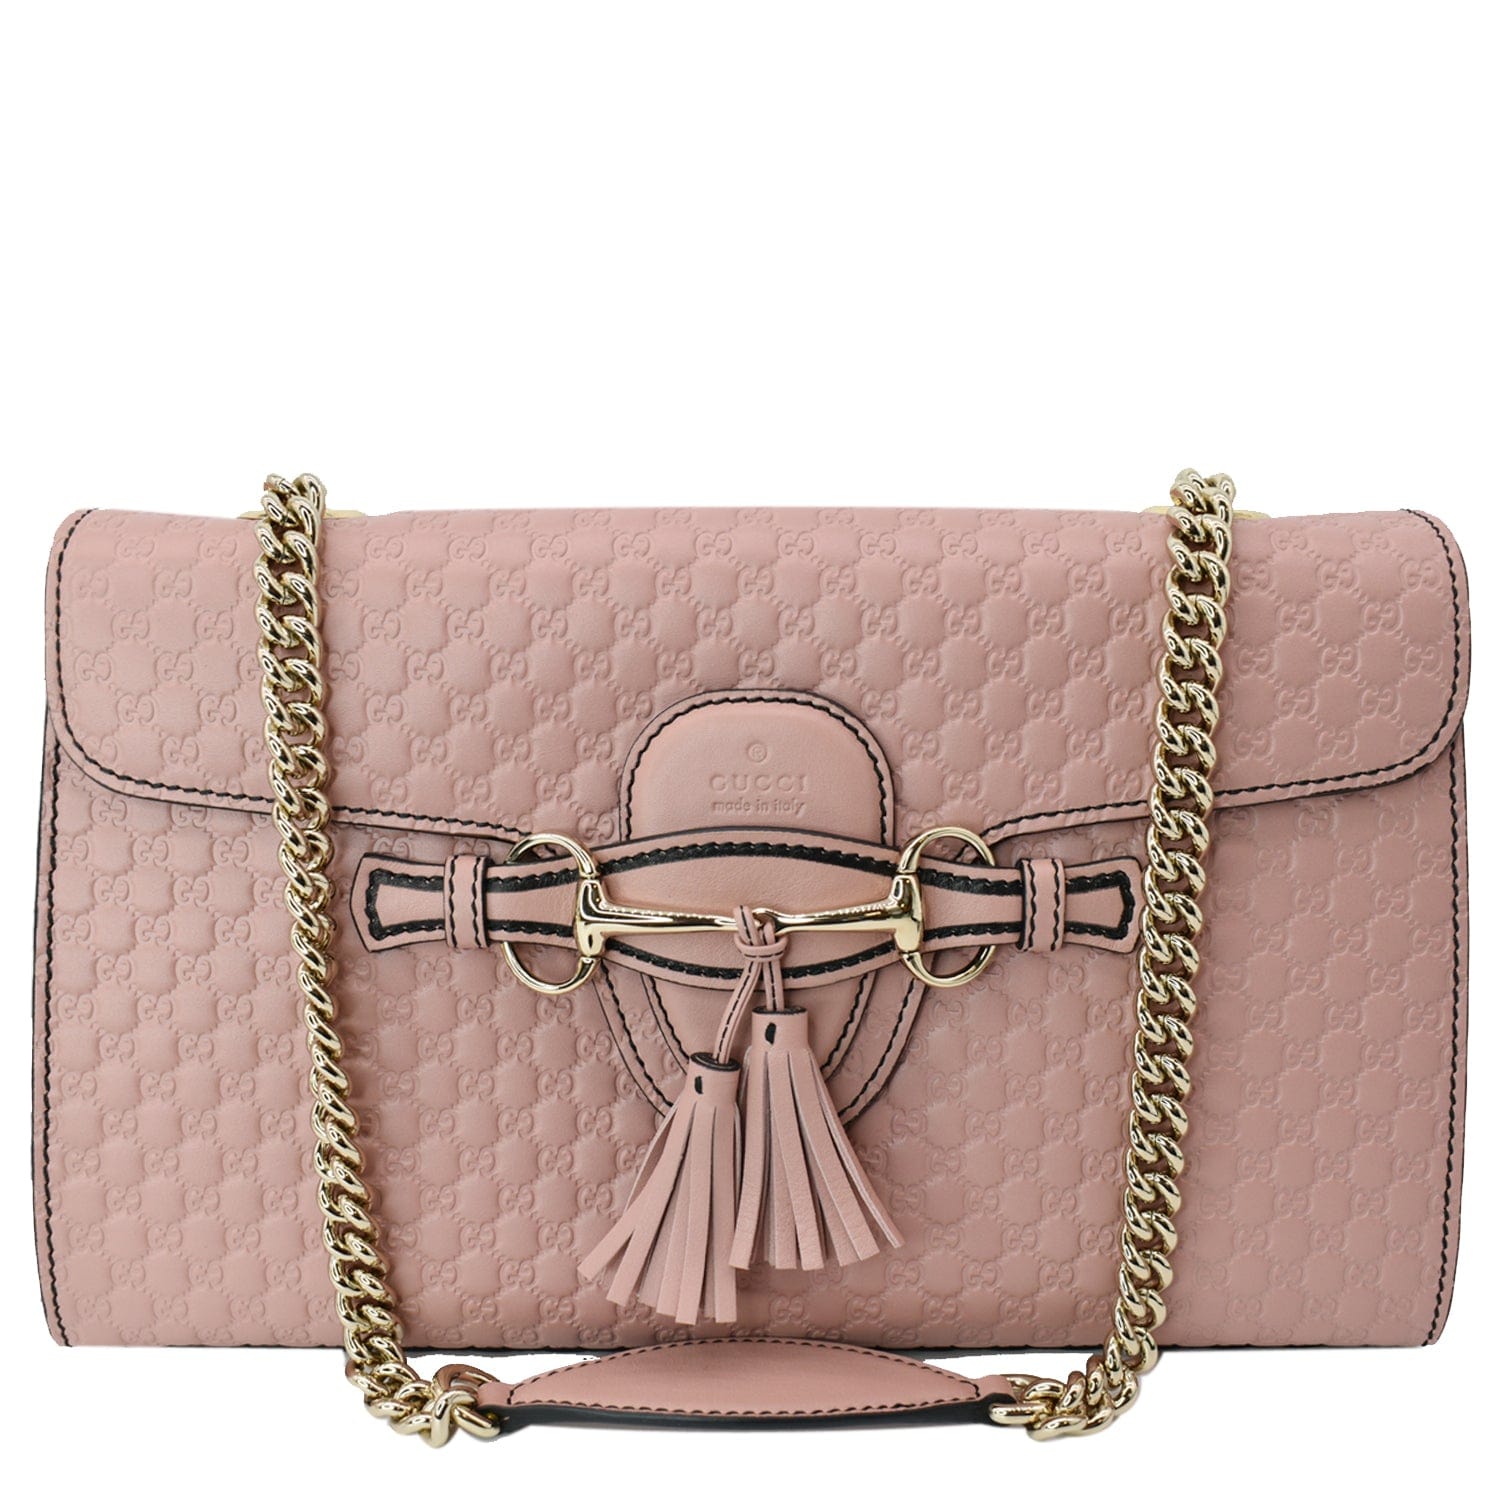 Valentino Bags Emily cross body bag with studs in pink